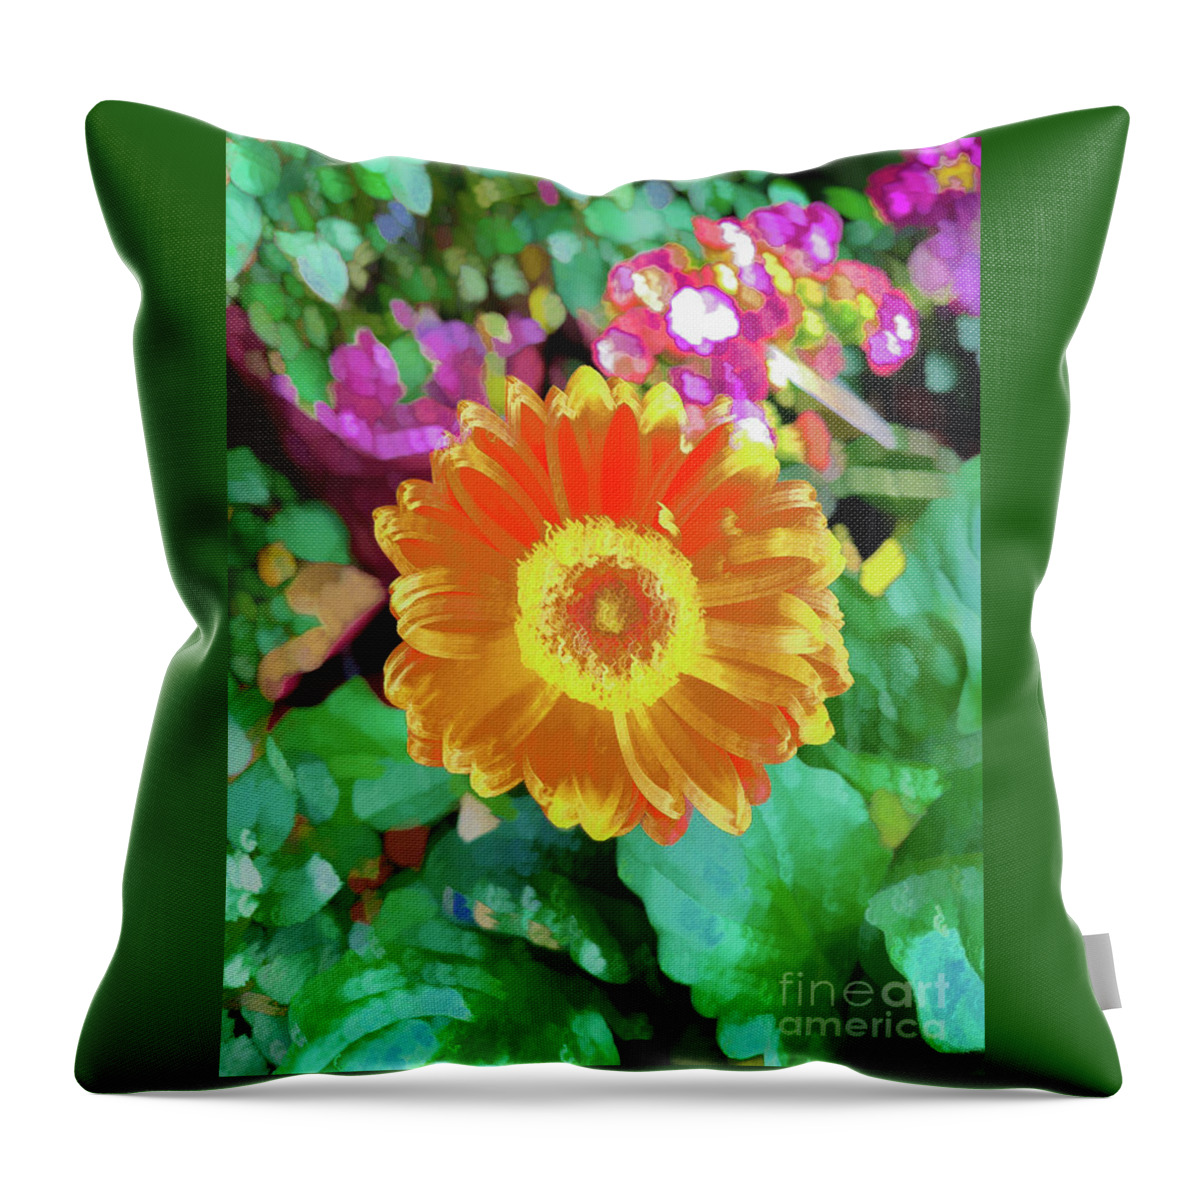 Abstract Throw Pillow featuring the photograph Yellow flower with green leaf abstract by Phillip Rubino